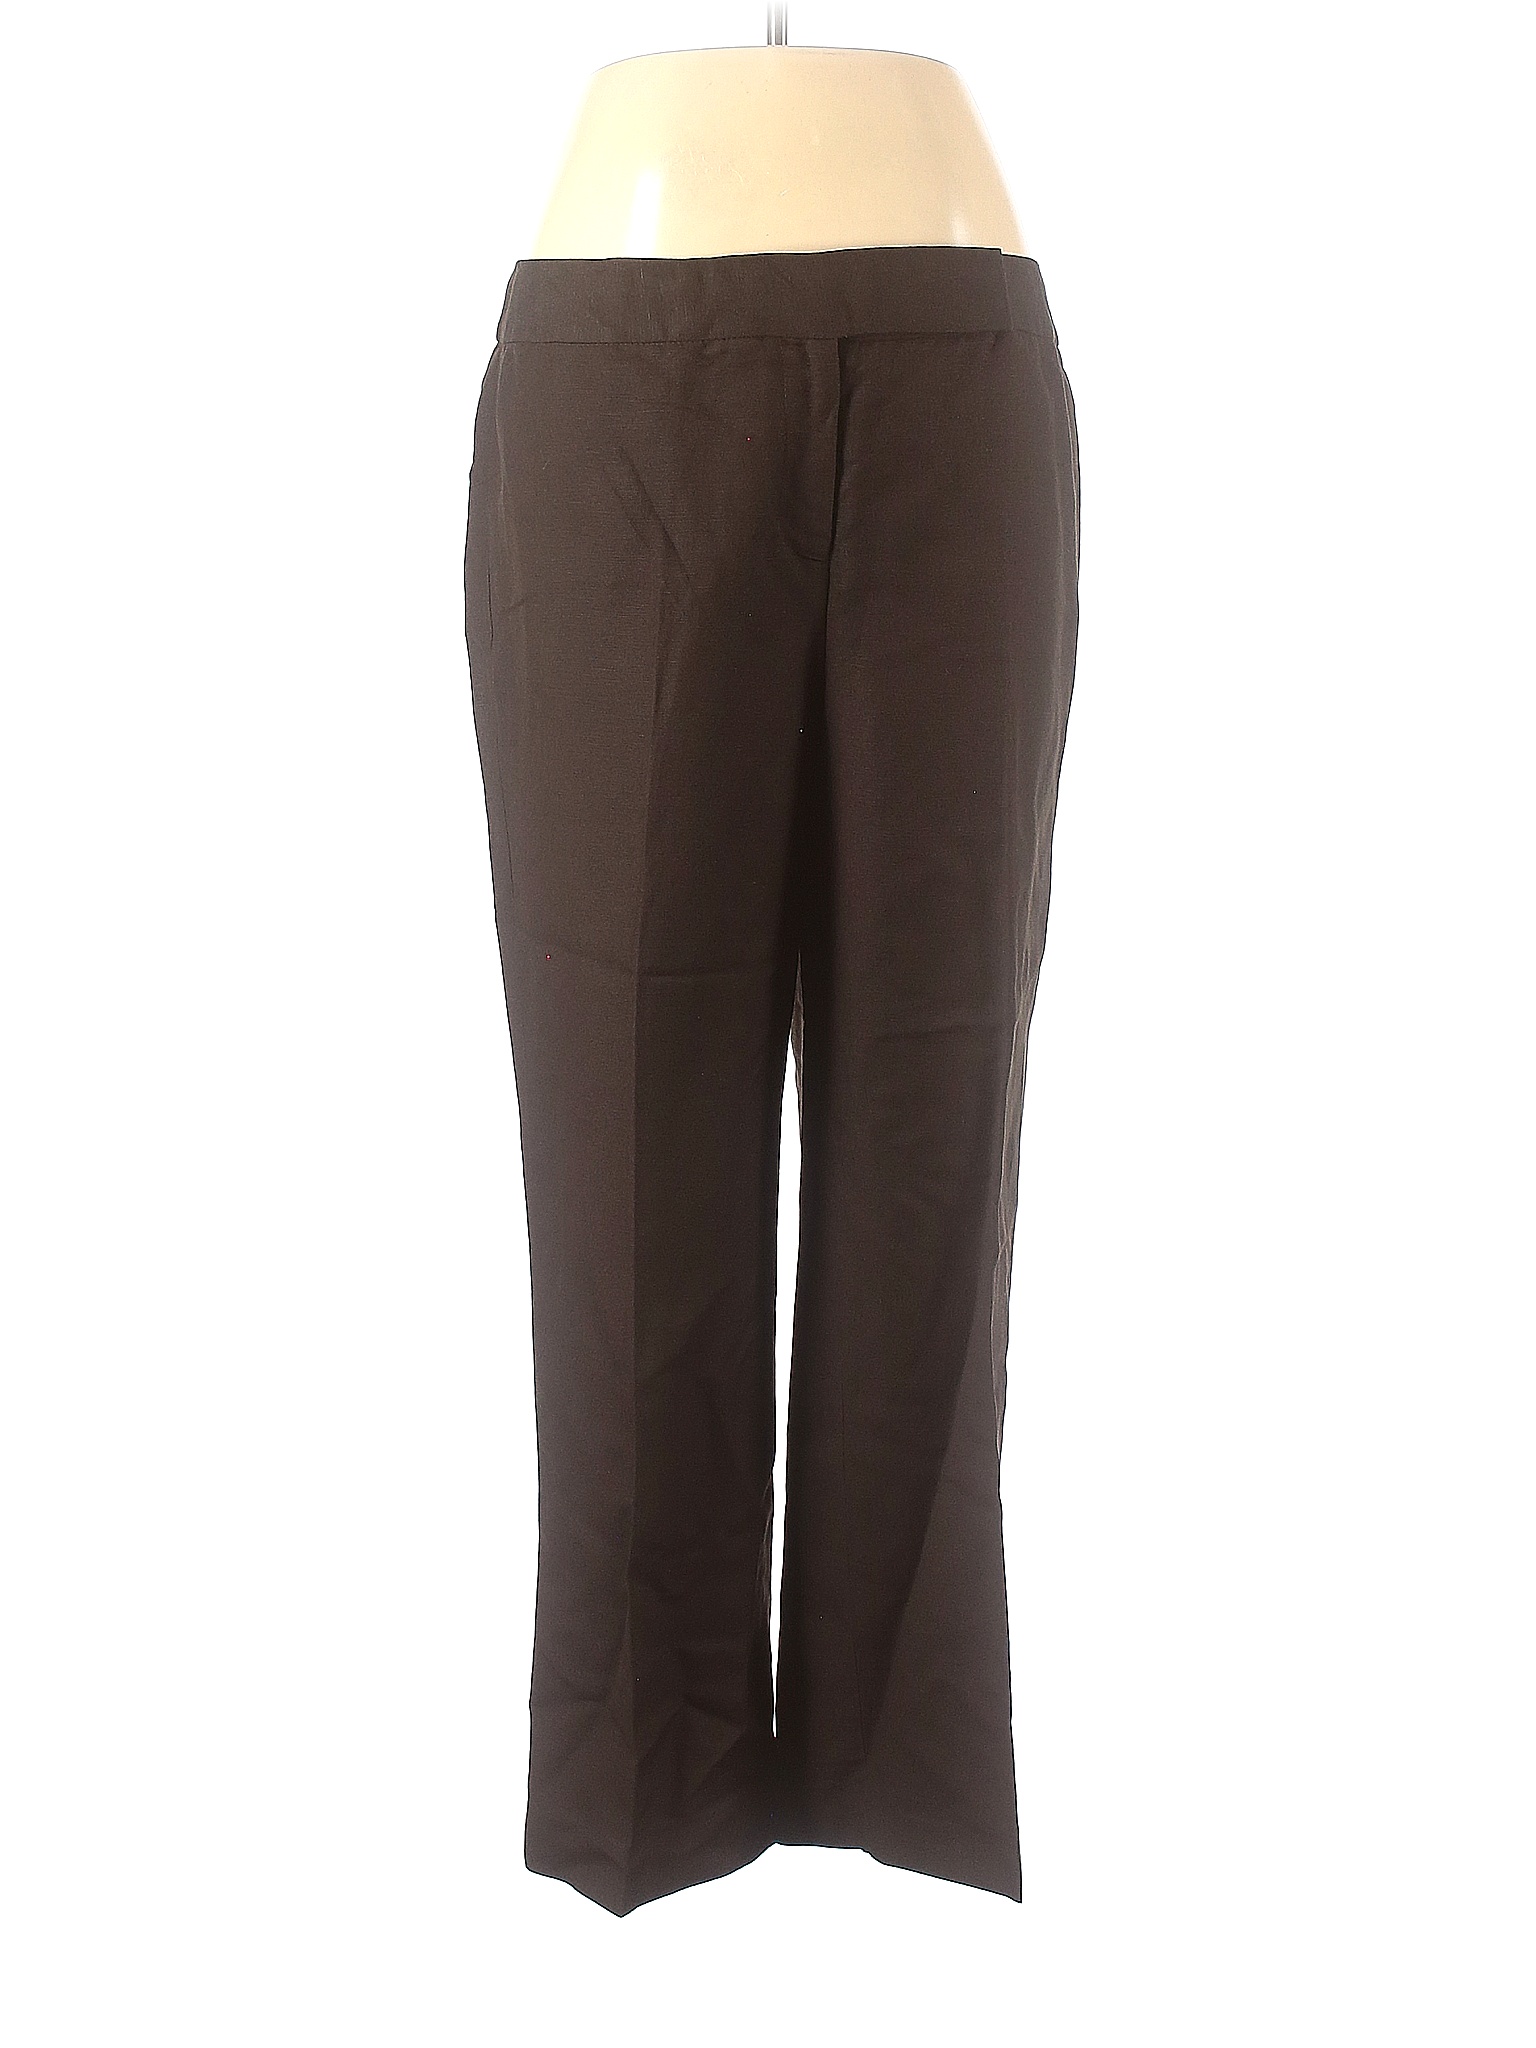 Nygard Collection Solid Brown Linen Pants Size 12 - 73% off | thredUP